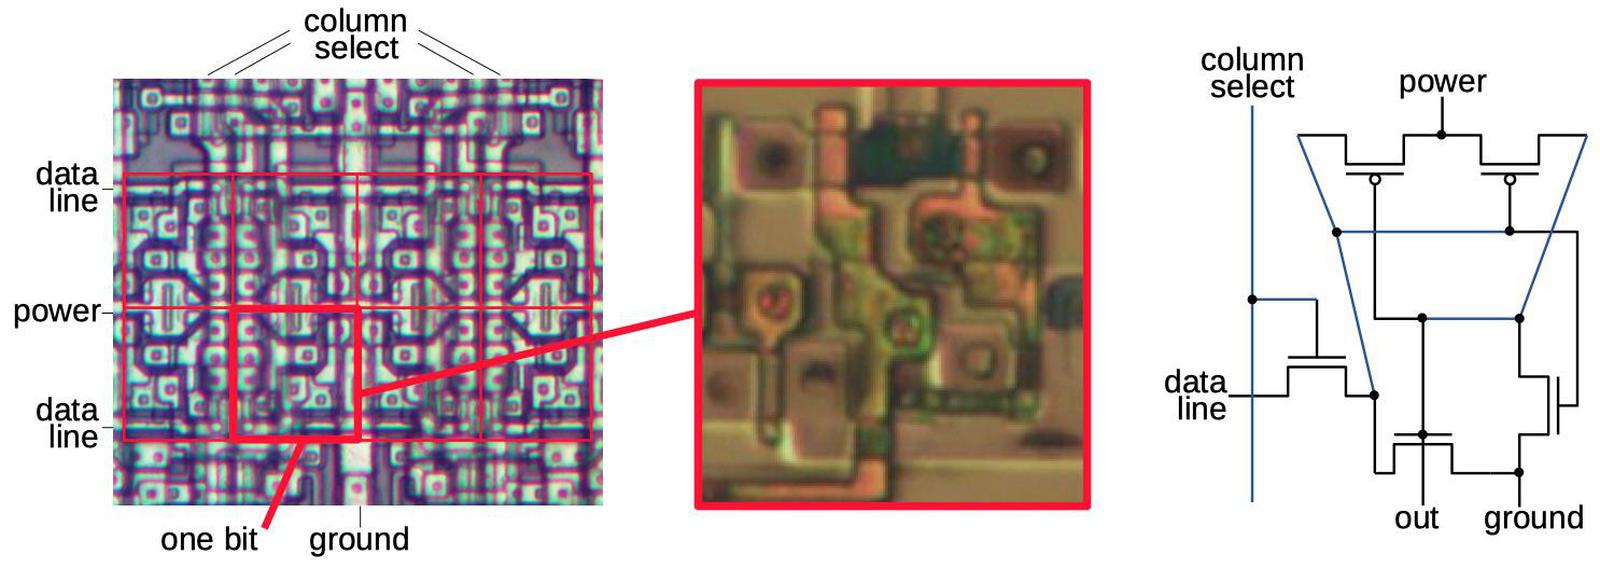 Eight bits of configuration memory, four above and four below. The red box shows one bit. When a column select line is activated, the row data line is loaded into the corresponding cells. The closeup and schematic show one bit of configuration memory. Die photo from siliconpr0n.